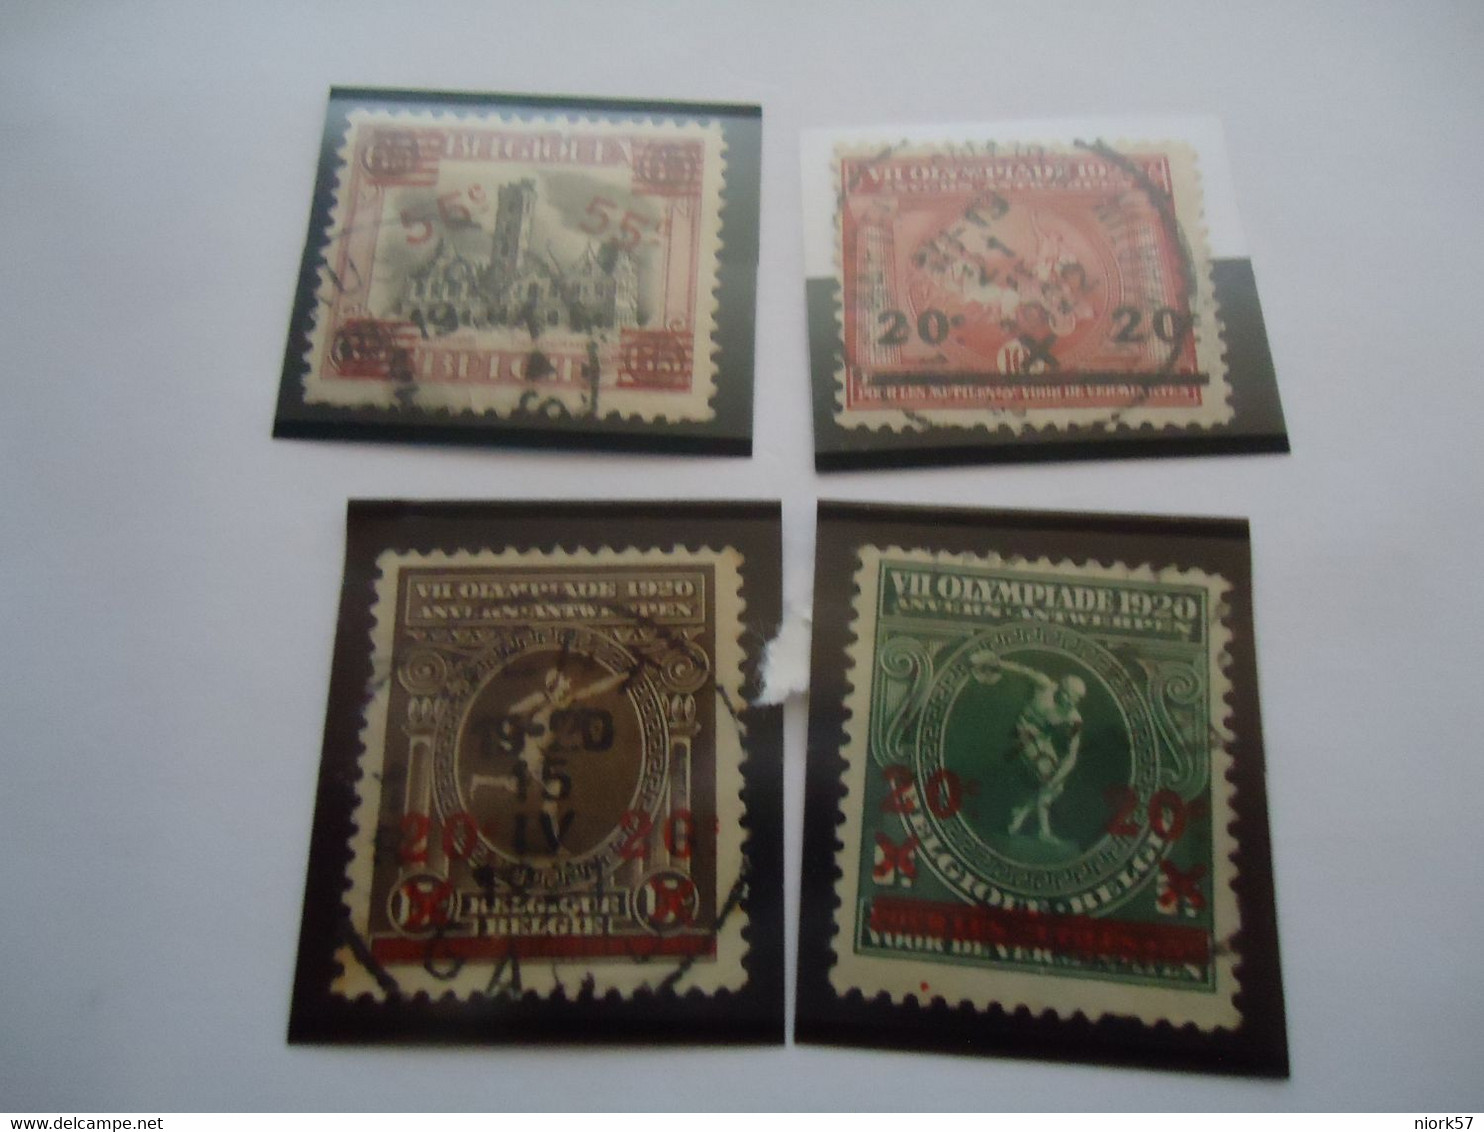 BELGIUM  4 USED STAMPS OLYMPIC GAMES 1920  OVERBRINT  WITH POSTMARKS - Sommer 1920: Antwerpen